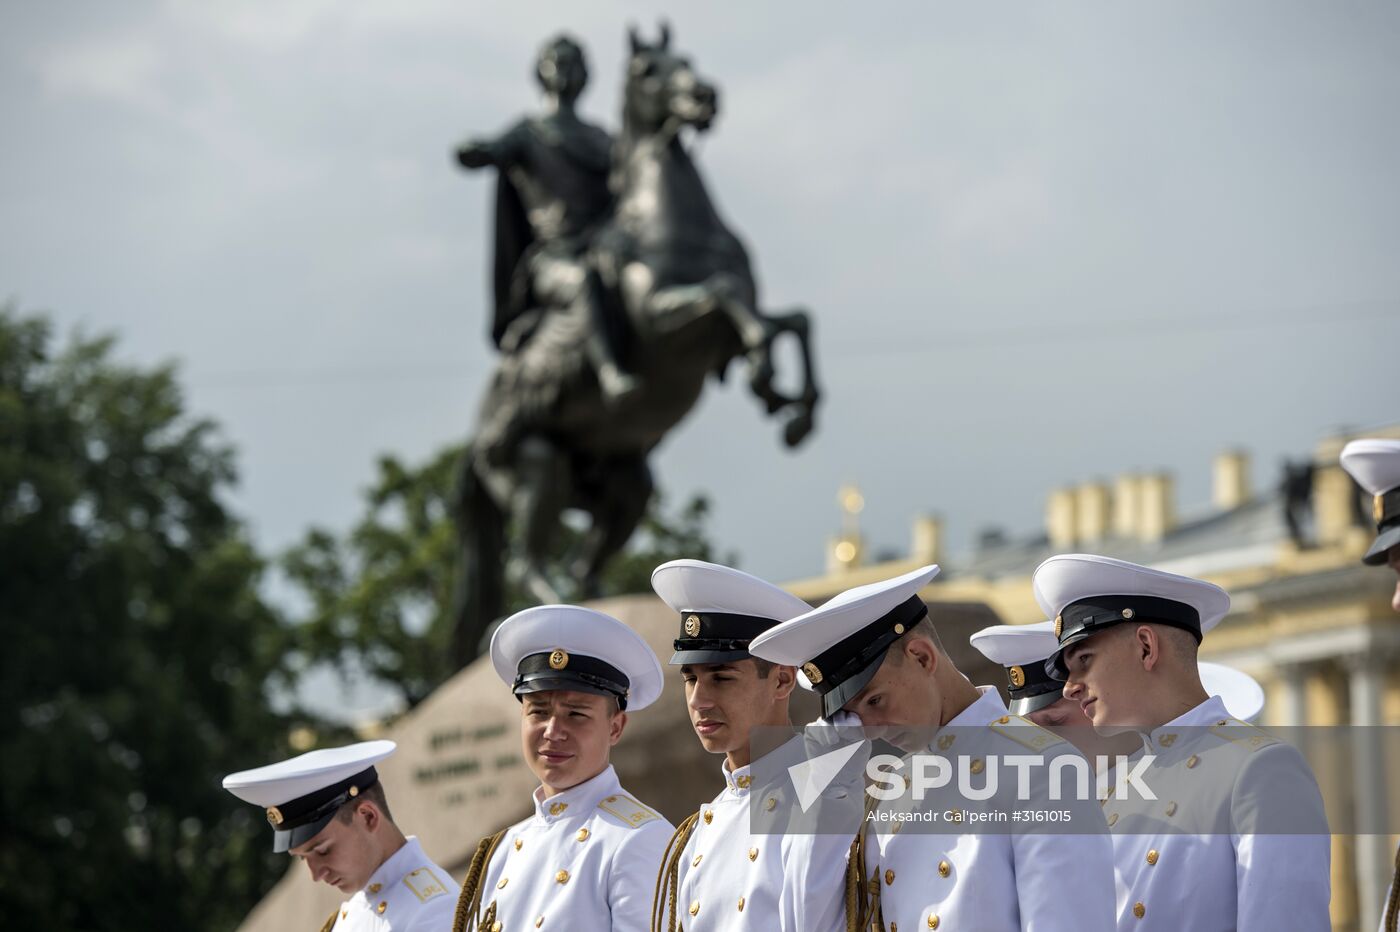 Dress rehearsal of Navy Day Parade in St. Petersburg